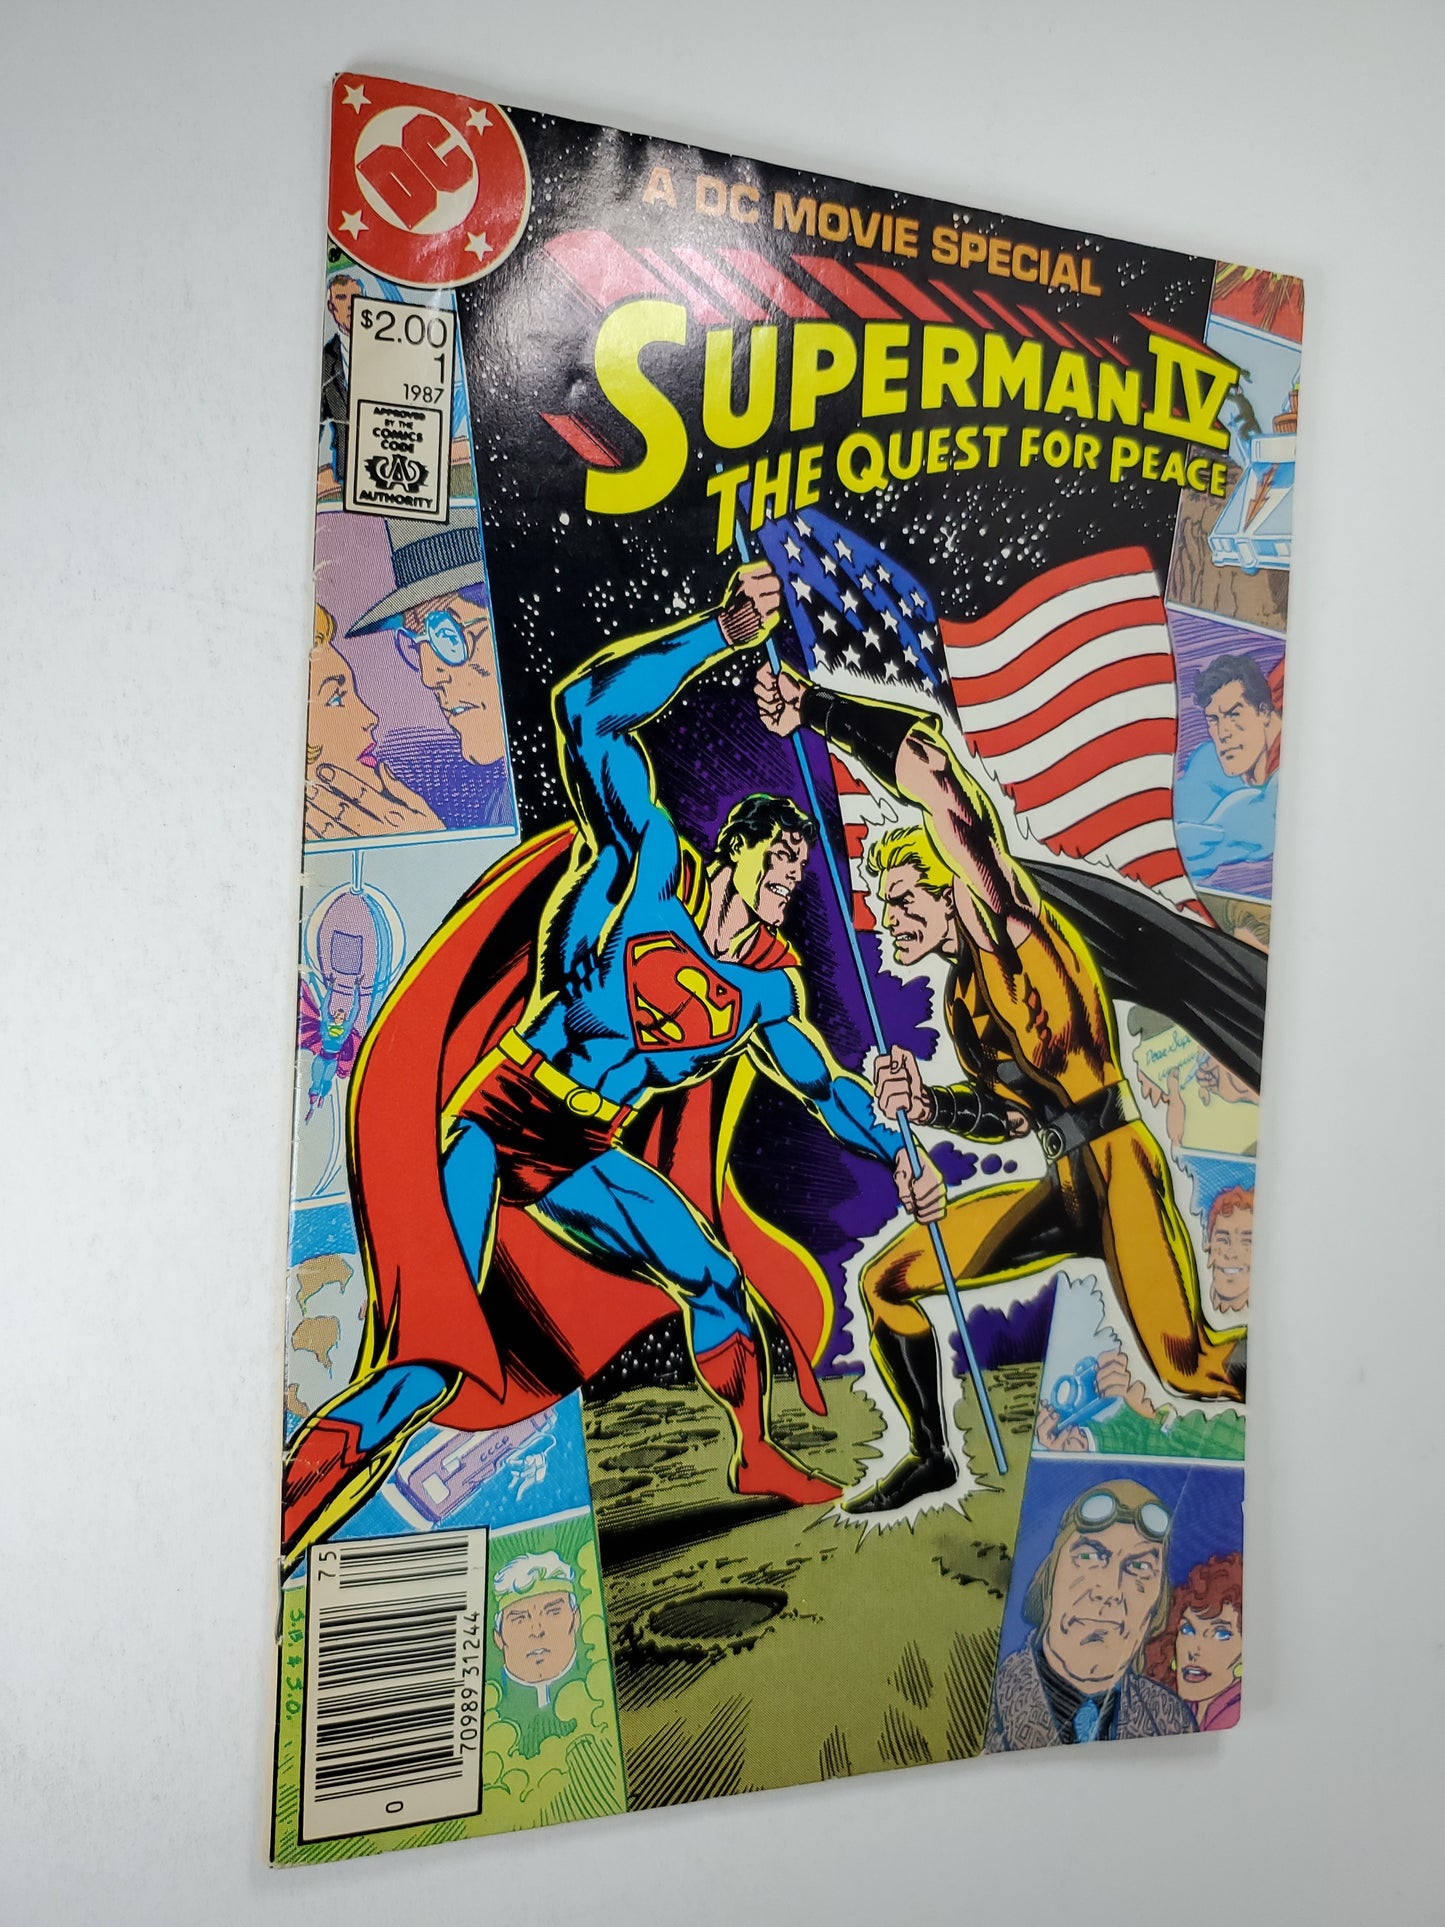 DC Superman IV Quest For Peace Vol 1 #1 Movie Special (1987)